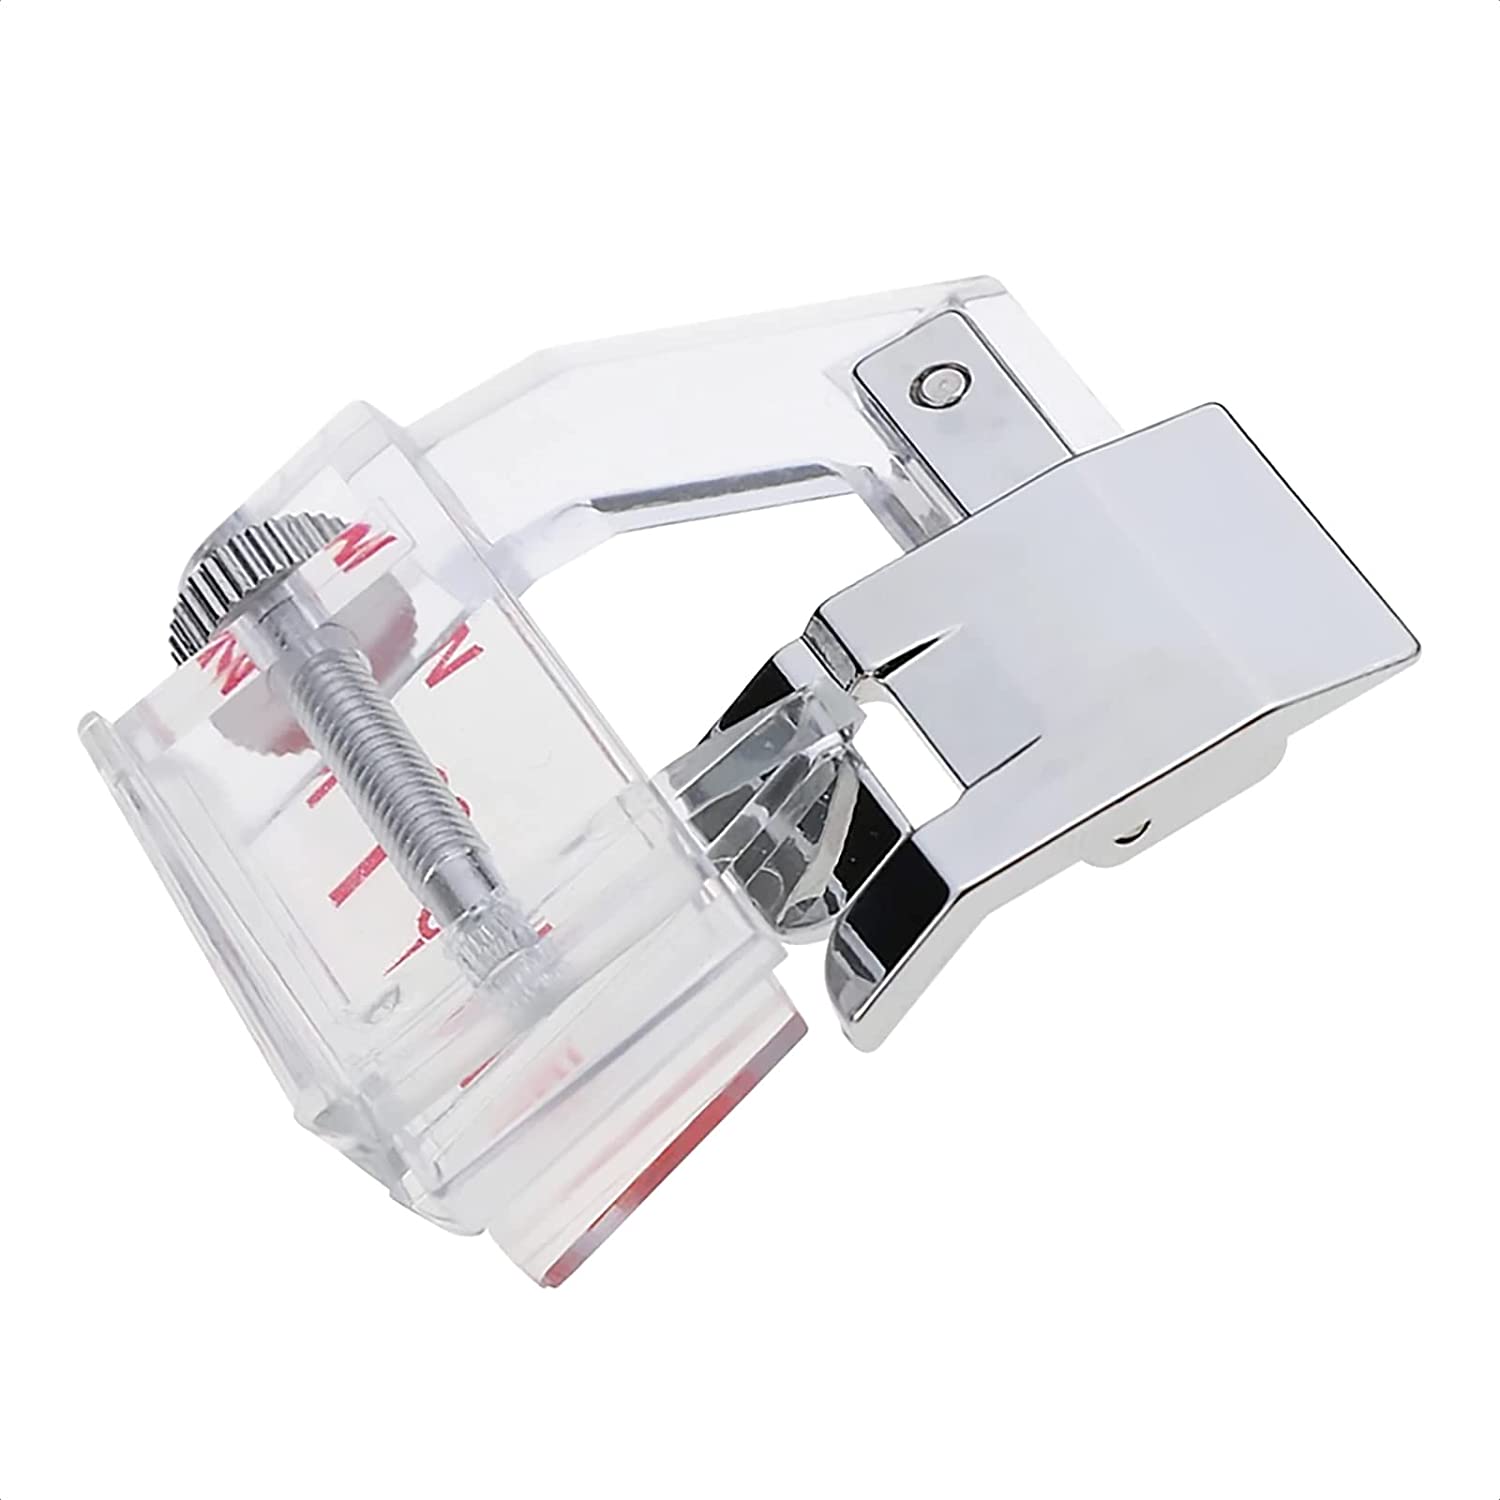 Adjustable Bias Binder Foot Sewing Machine Presser Foot Snap-on-Compatible Fits All Low Shank Snap-On Singer, Brother and More!The Adjustable Range